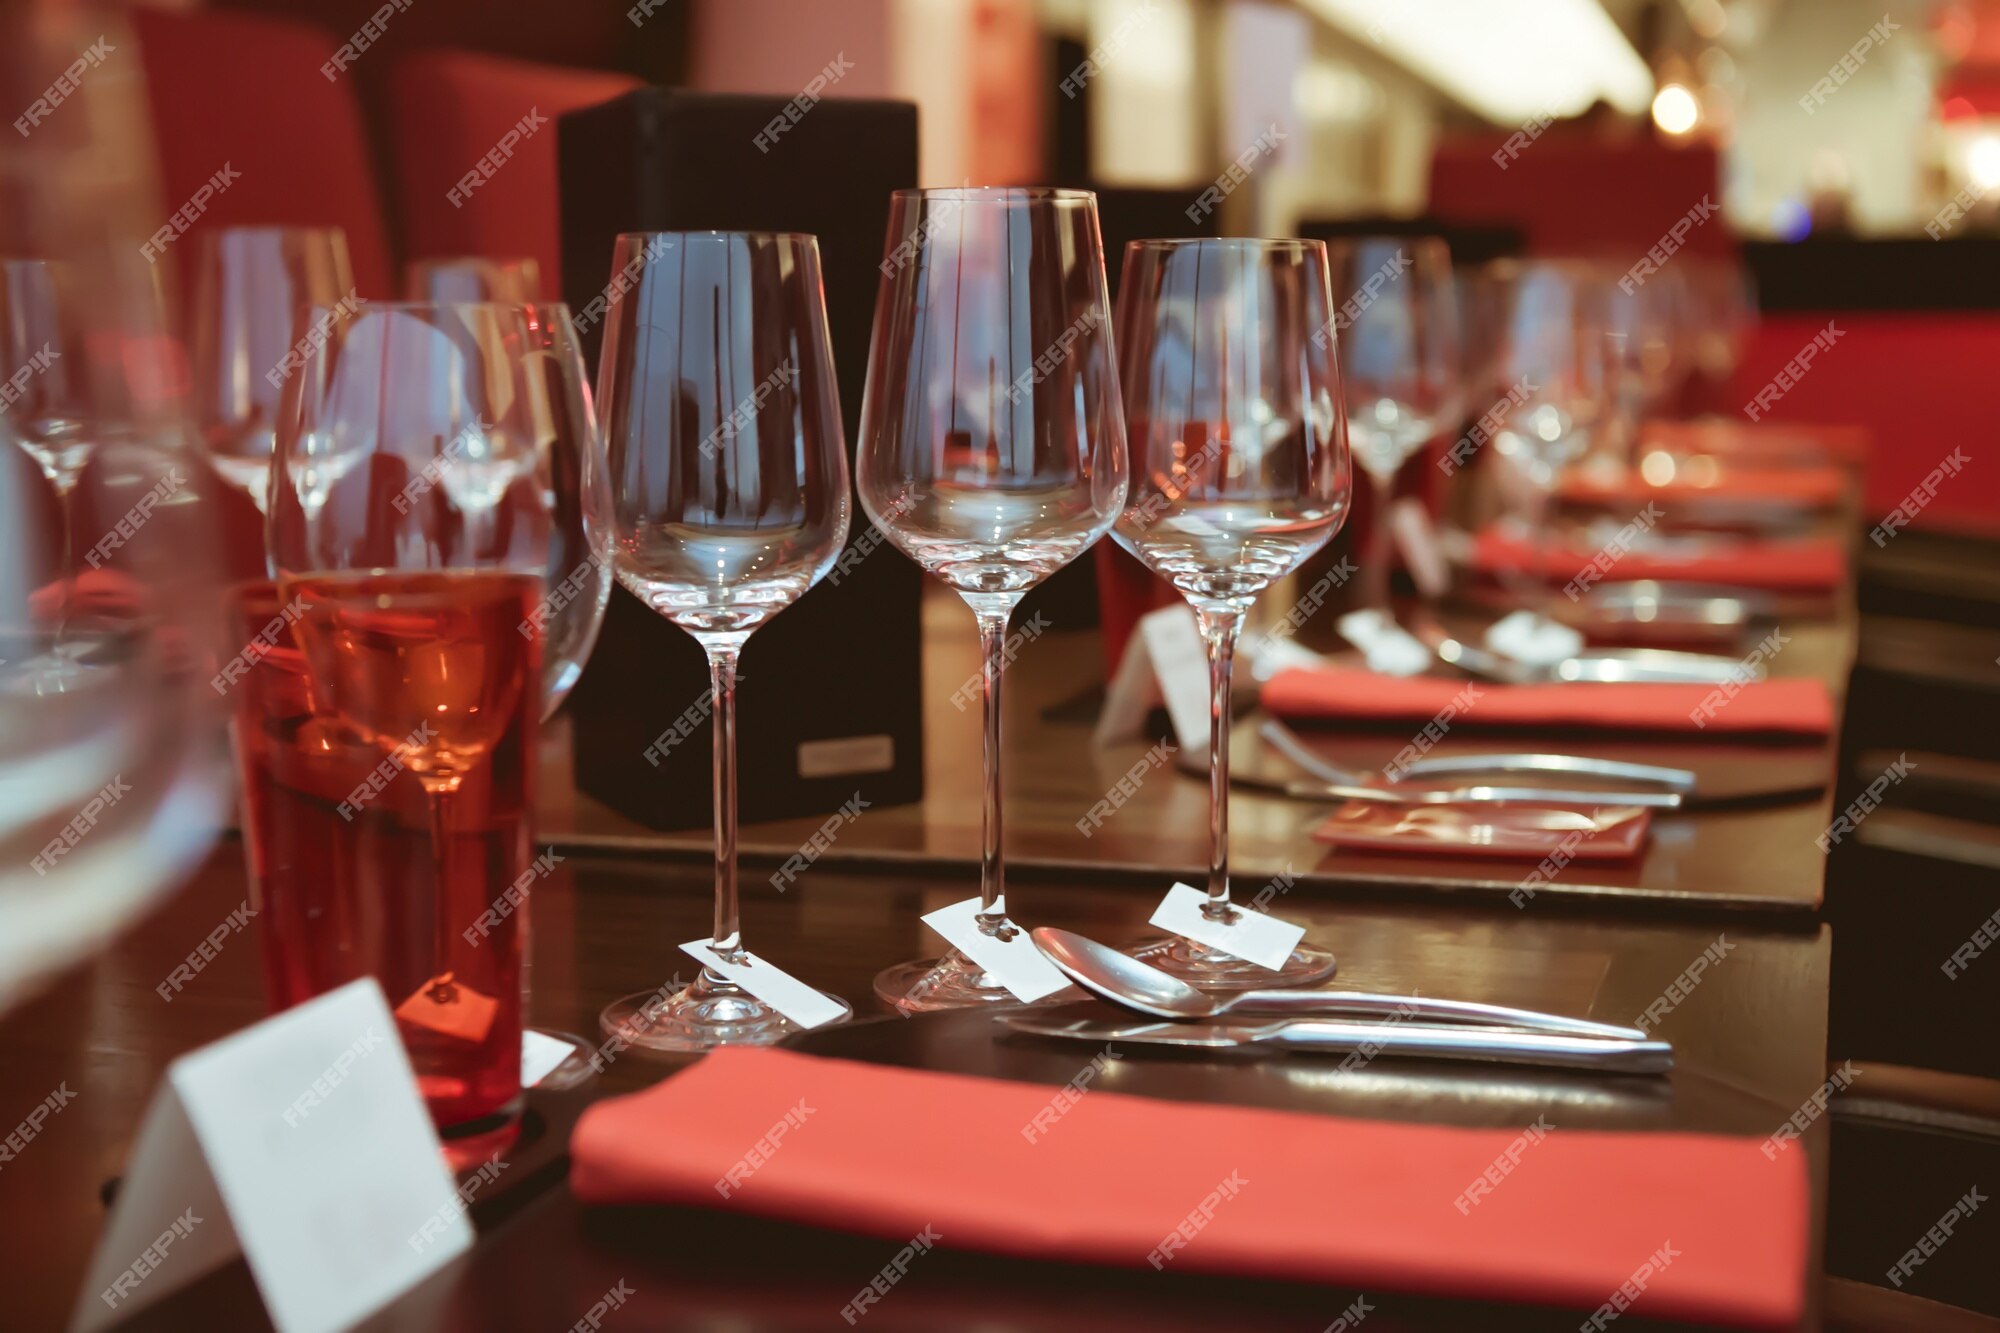 Wine Glasses On The Banquet Table Of A Luxury Hotel In Vintage